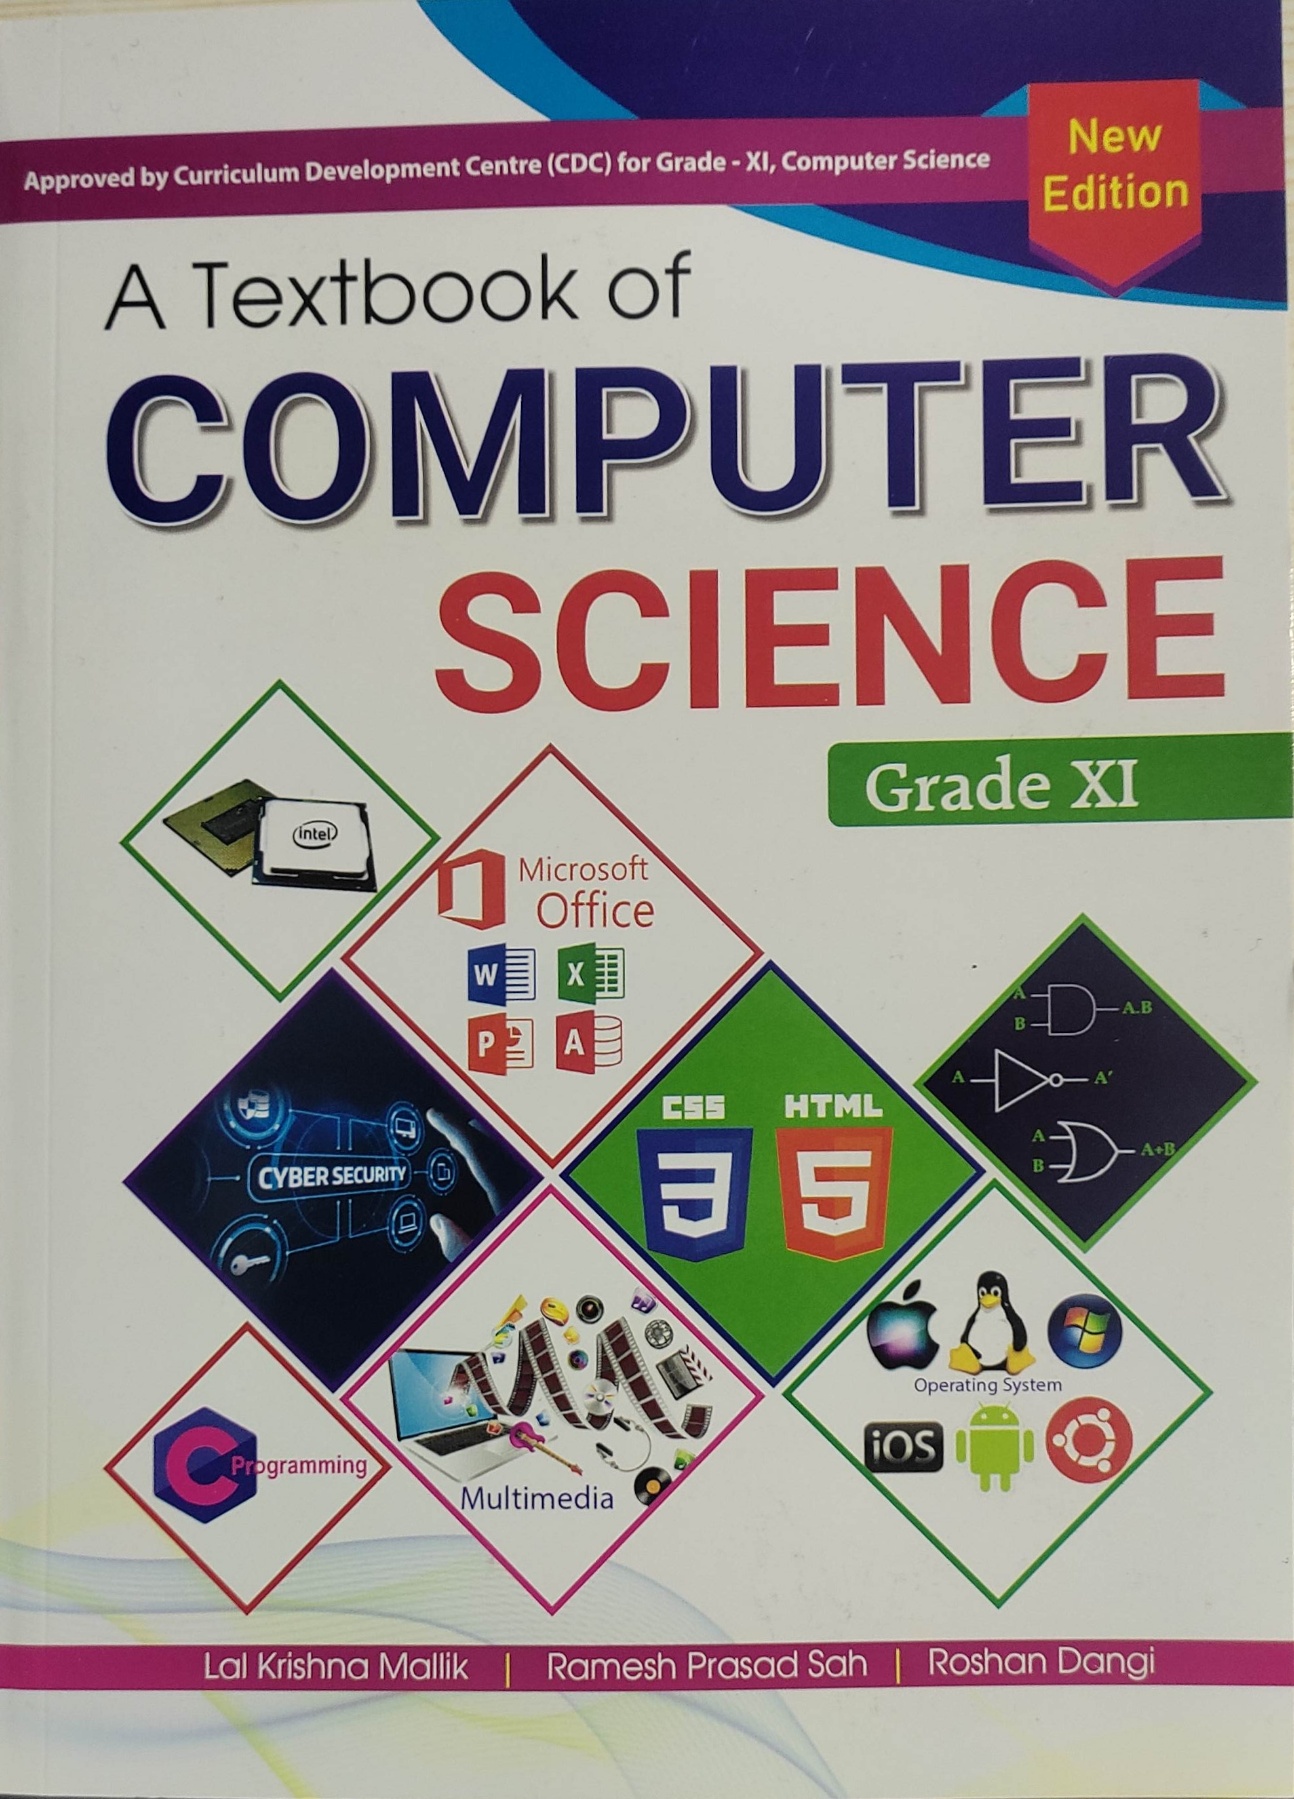 A Textbook of Computer Science- Grade XI